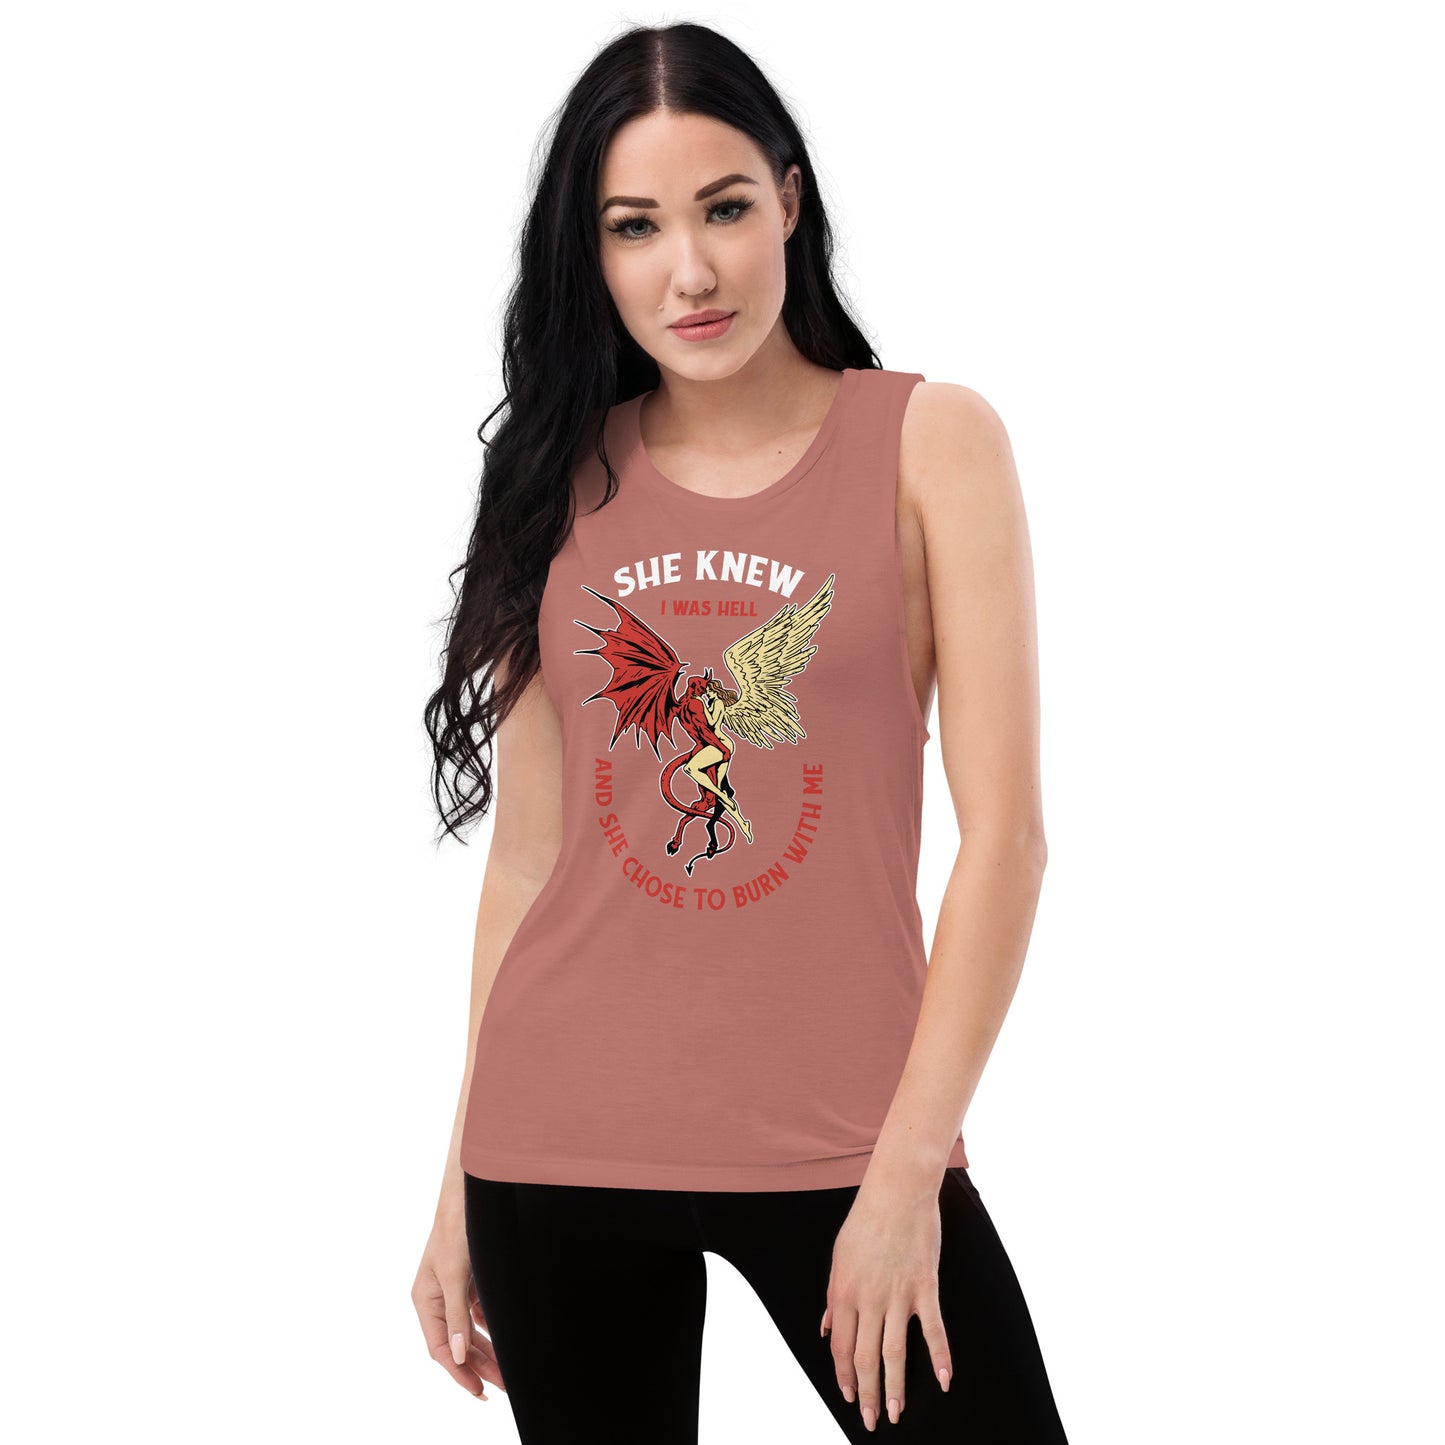 She Knew I Was Hell Ladies’ Muscle Tank